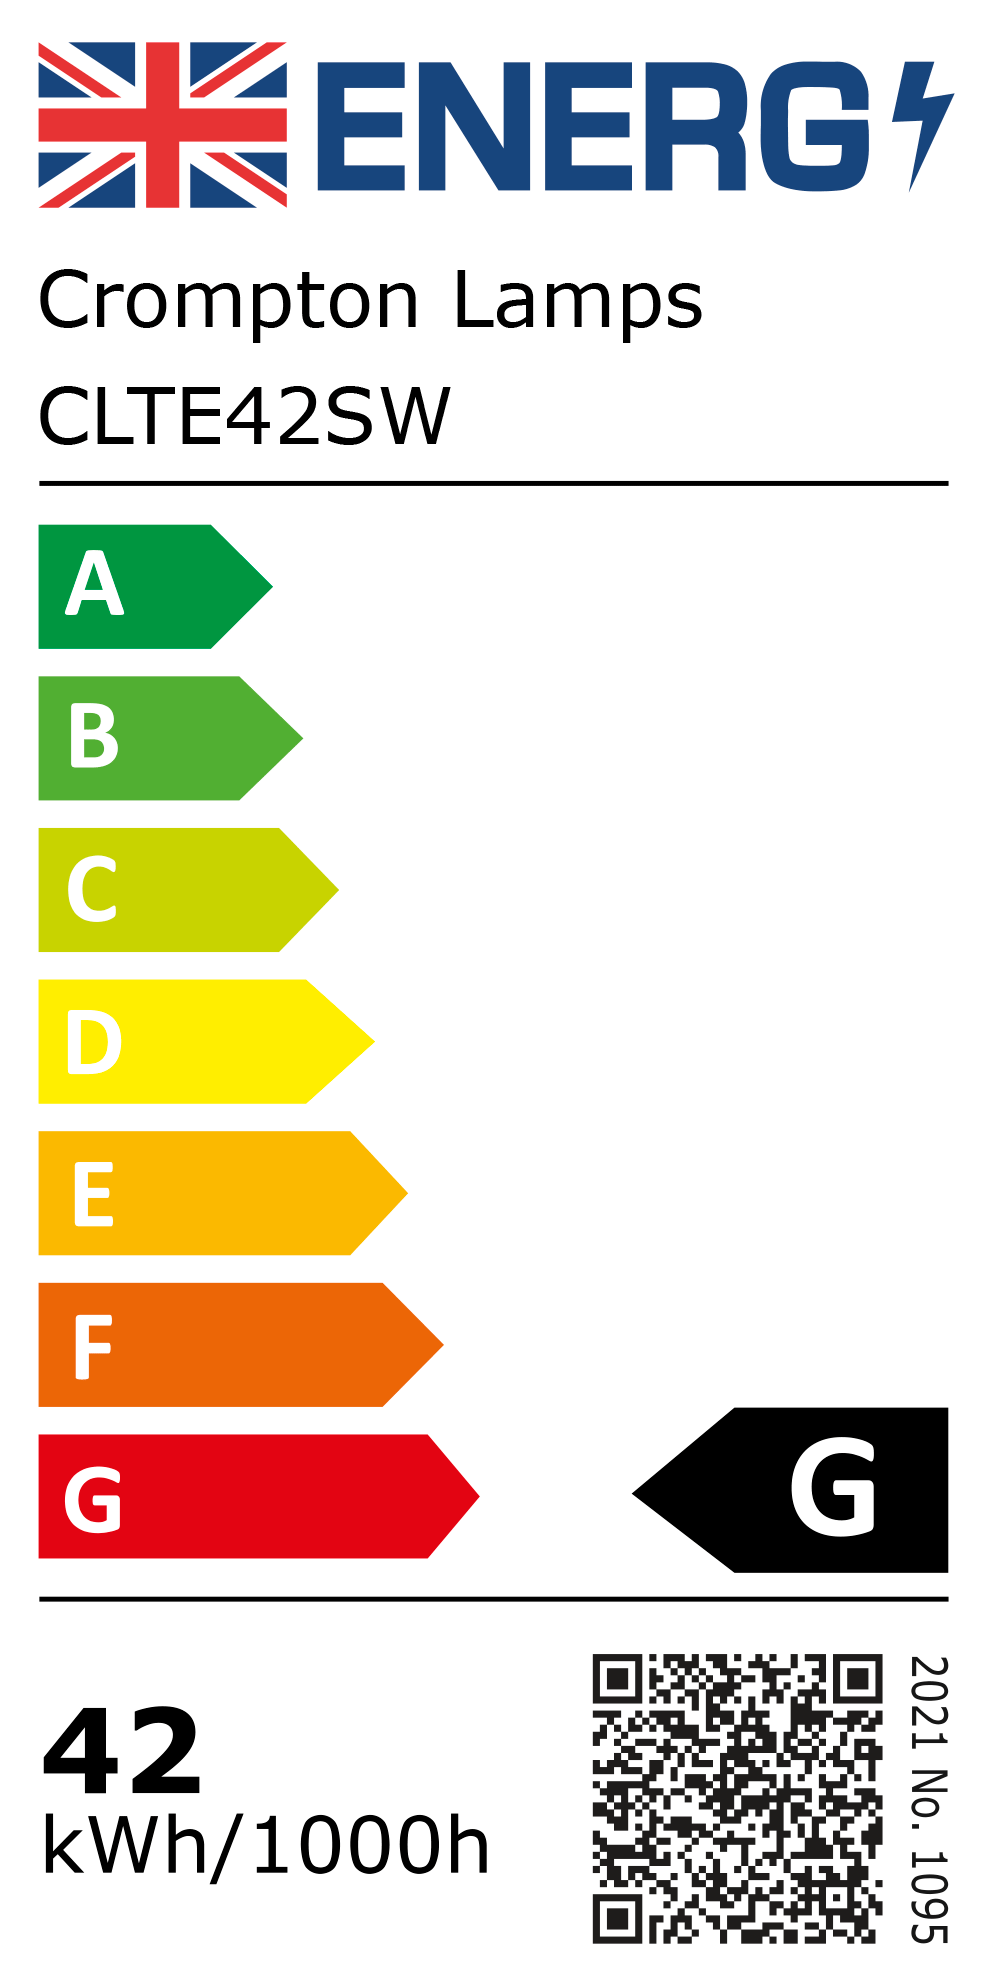 New 2021 Energy Rating Label: Stock Code CLTE42SW